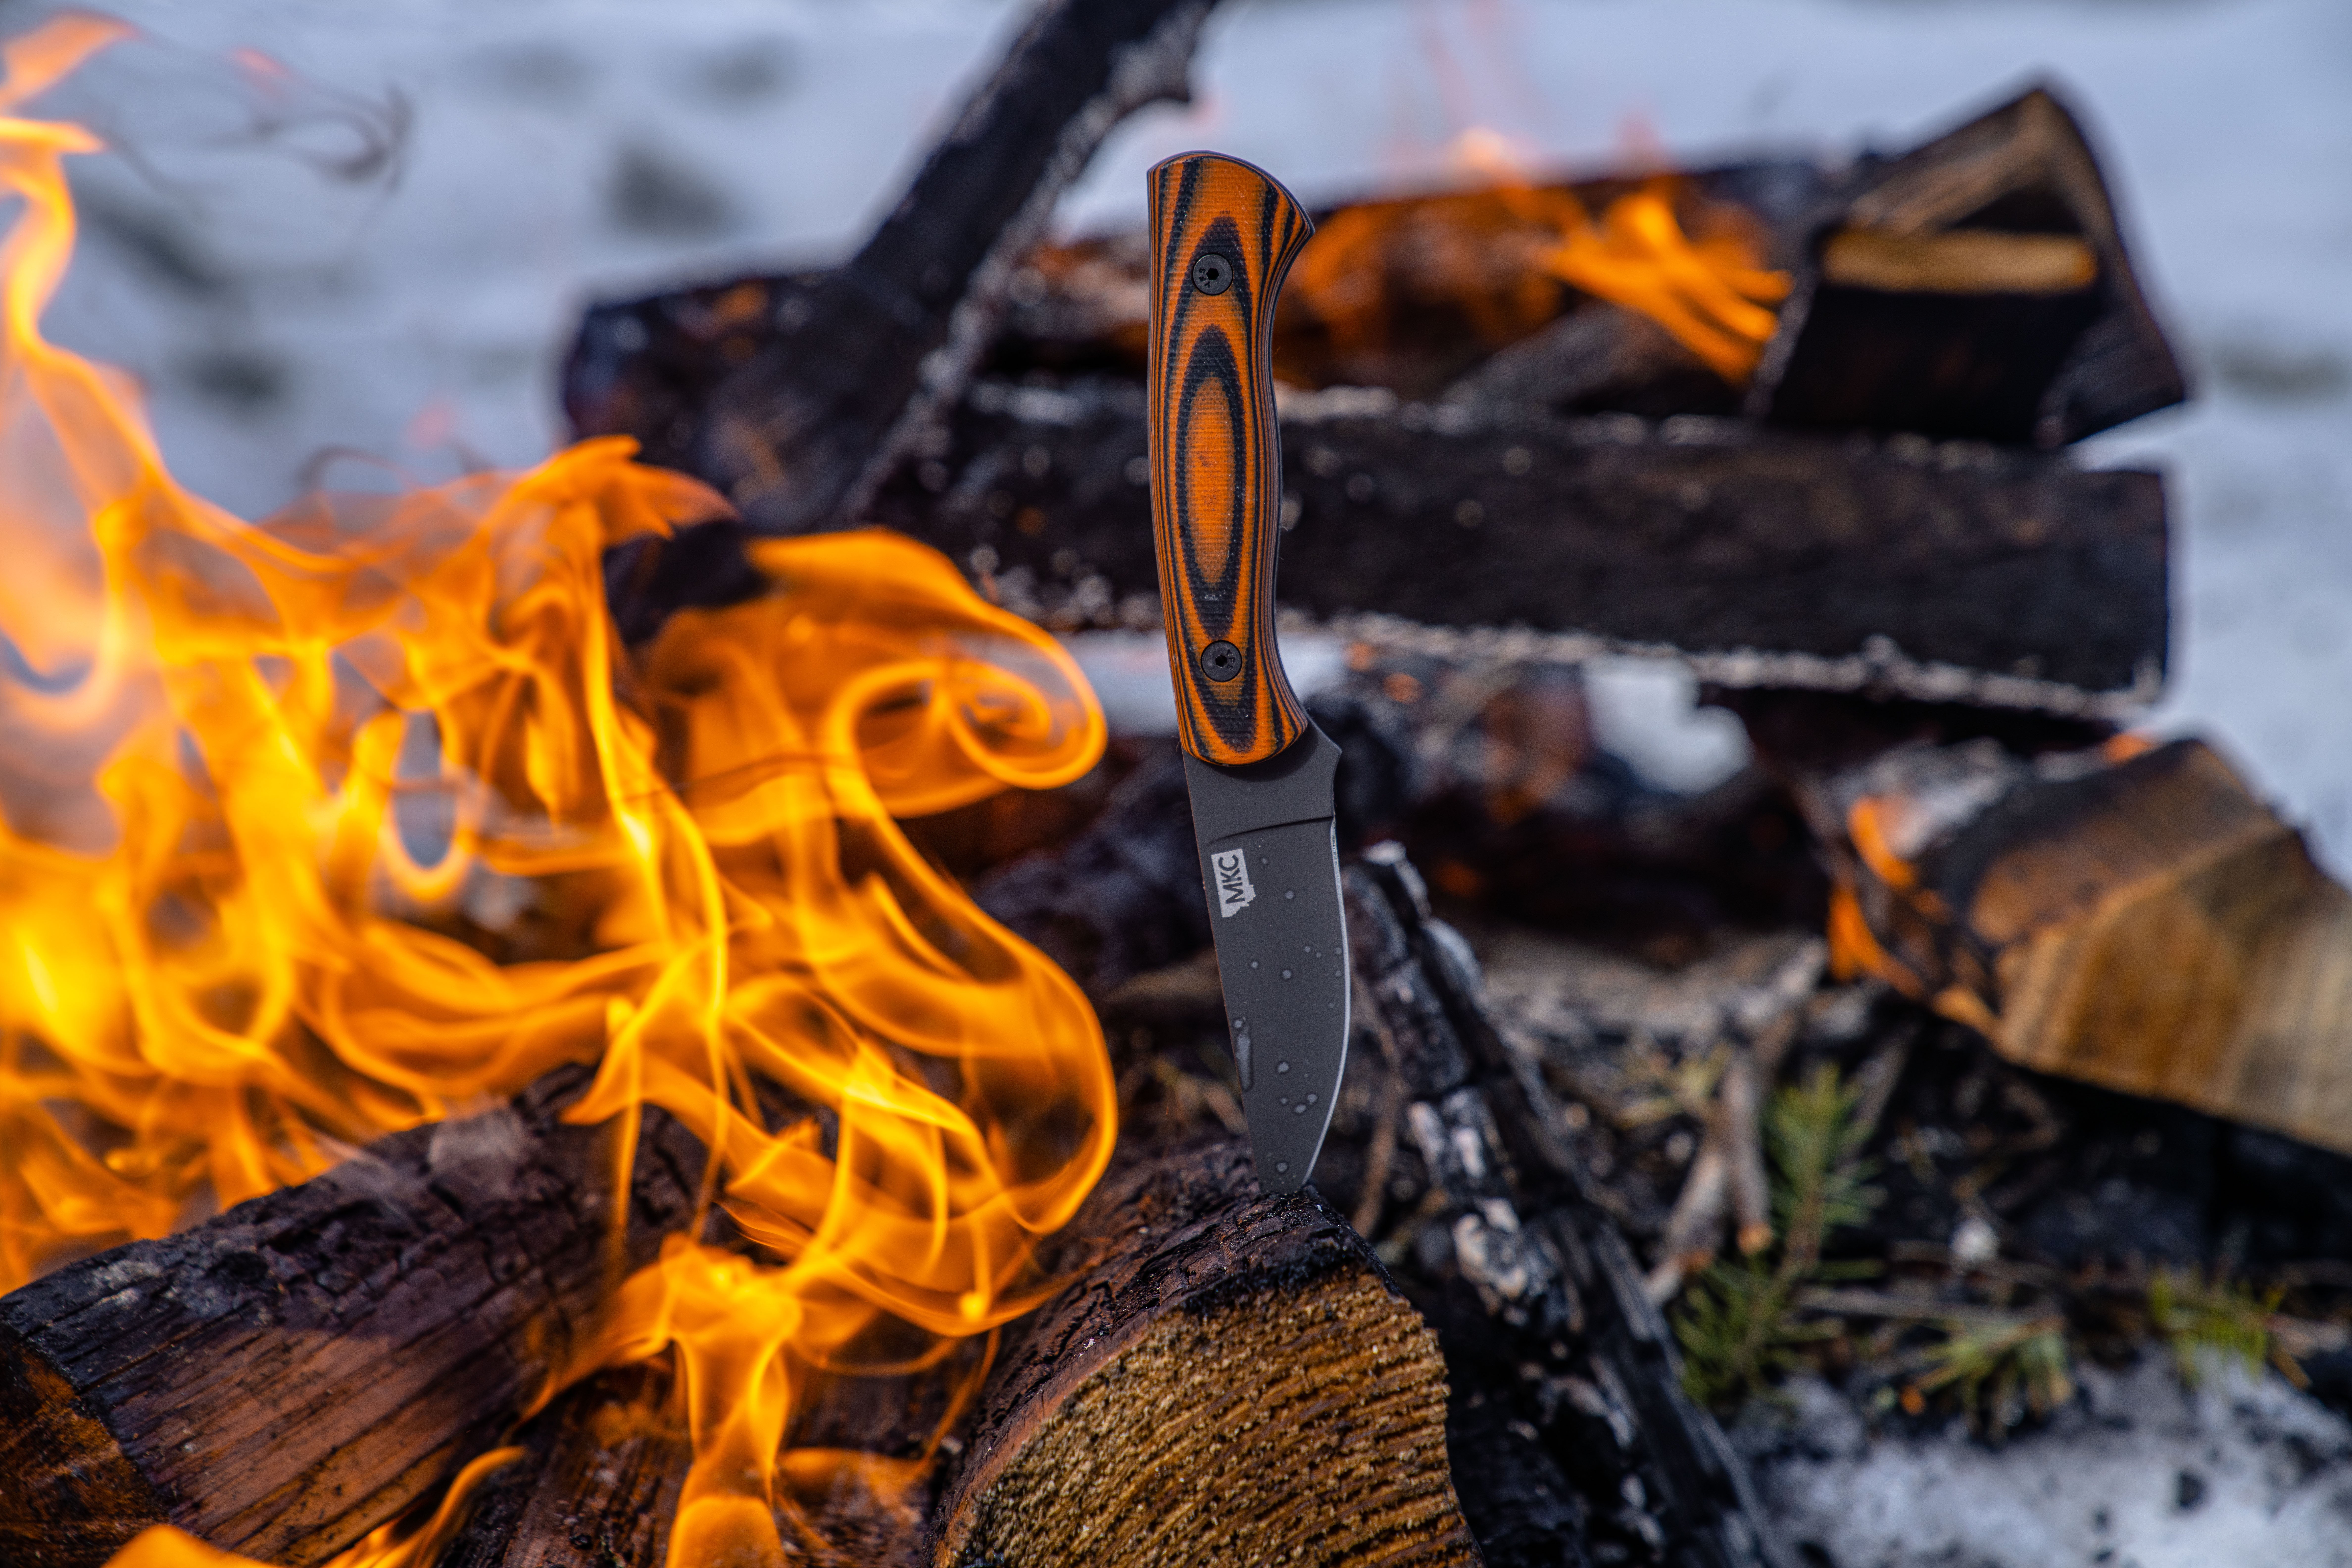 Montana Knife Company's Blackfoot took how the award for best fixed blade knife in our test. 